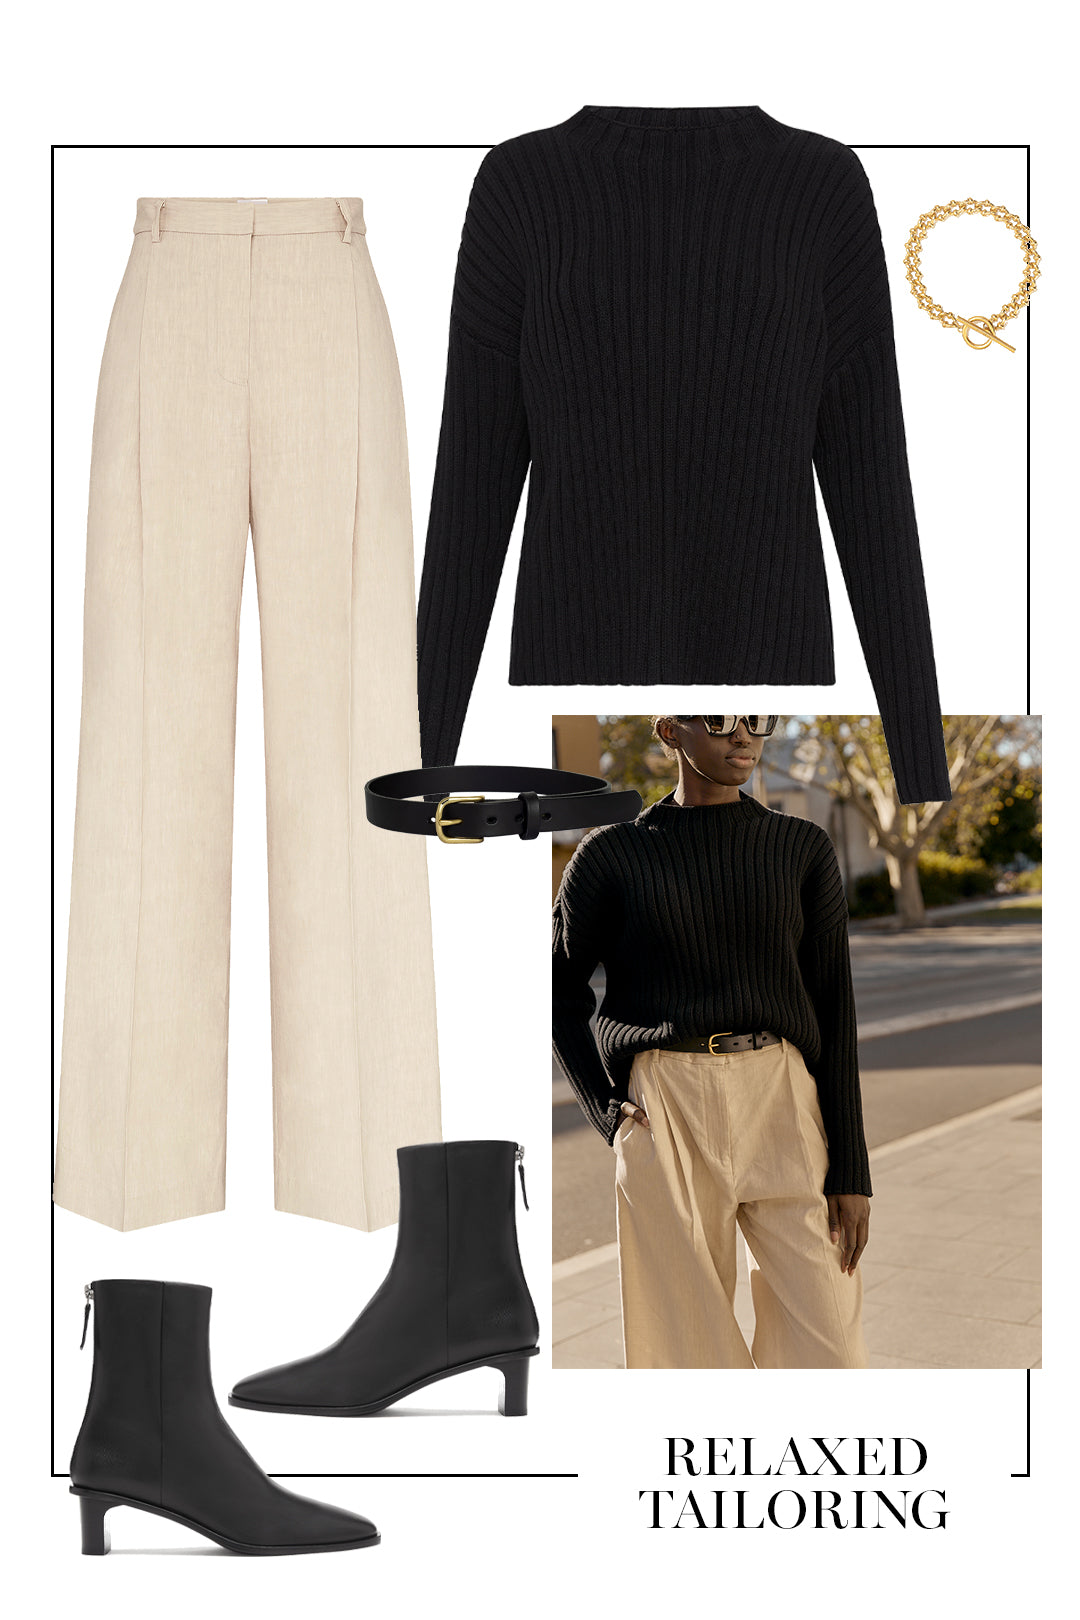 The UNDONE - Neutral trousers and black knit